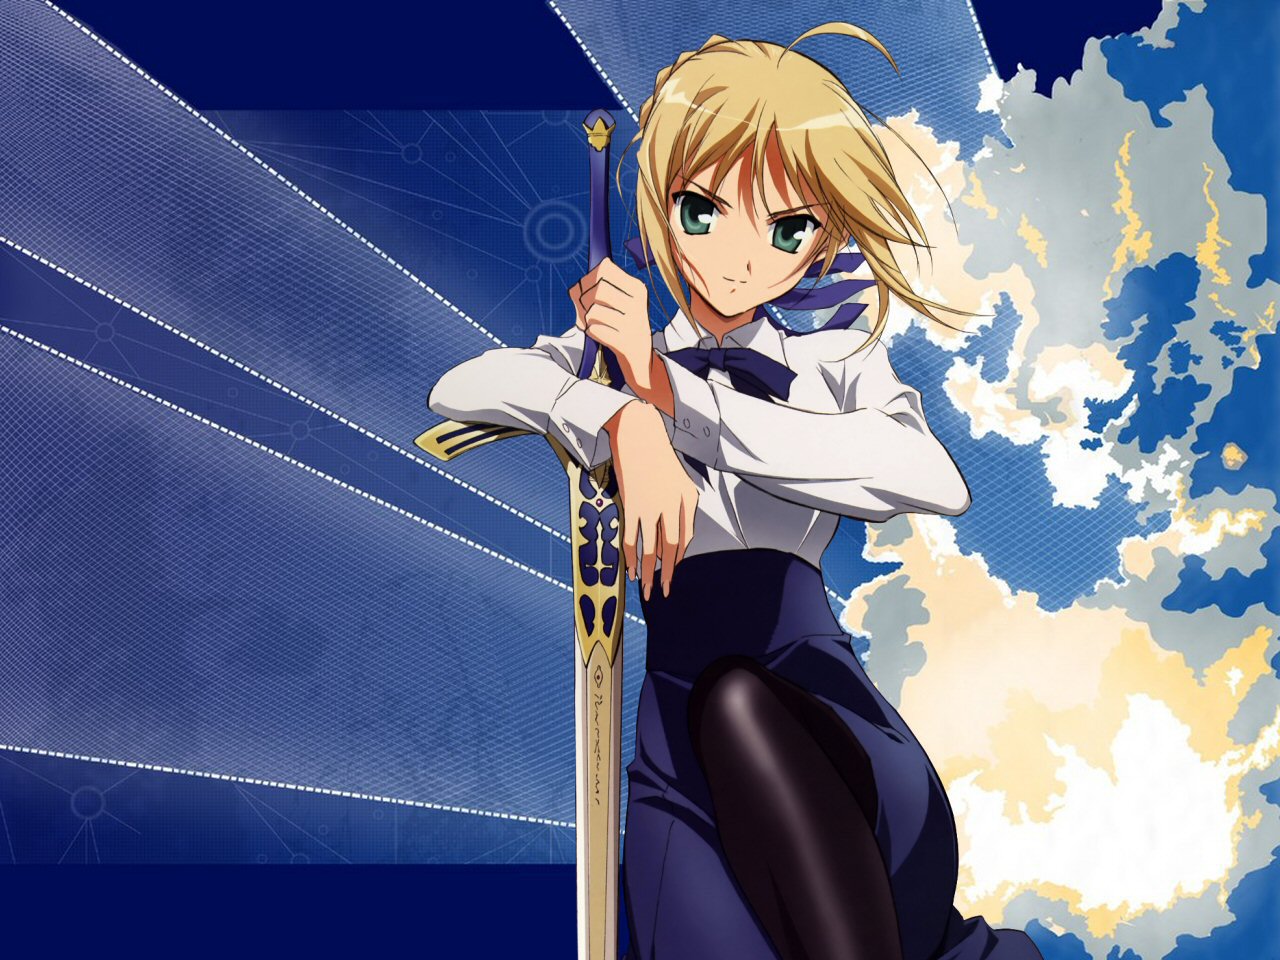 Stay Night Image Saber HD Wallpaper And Background Photos